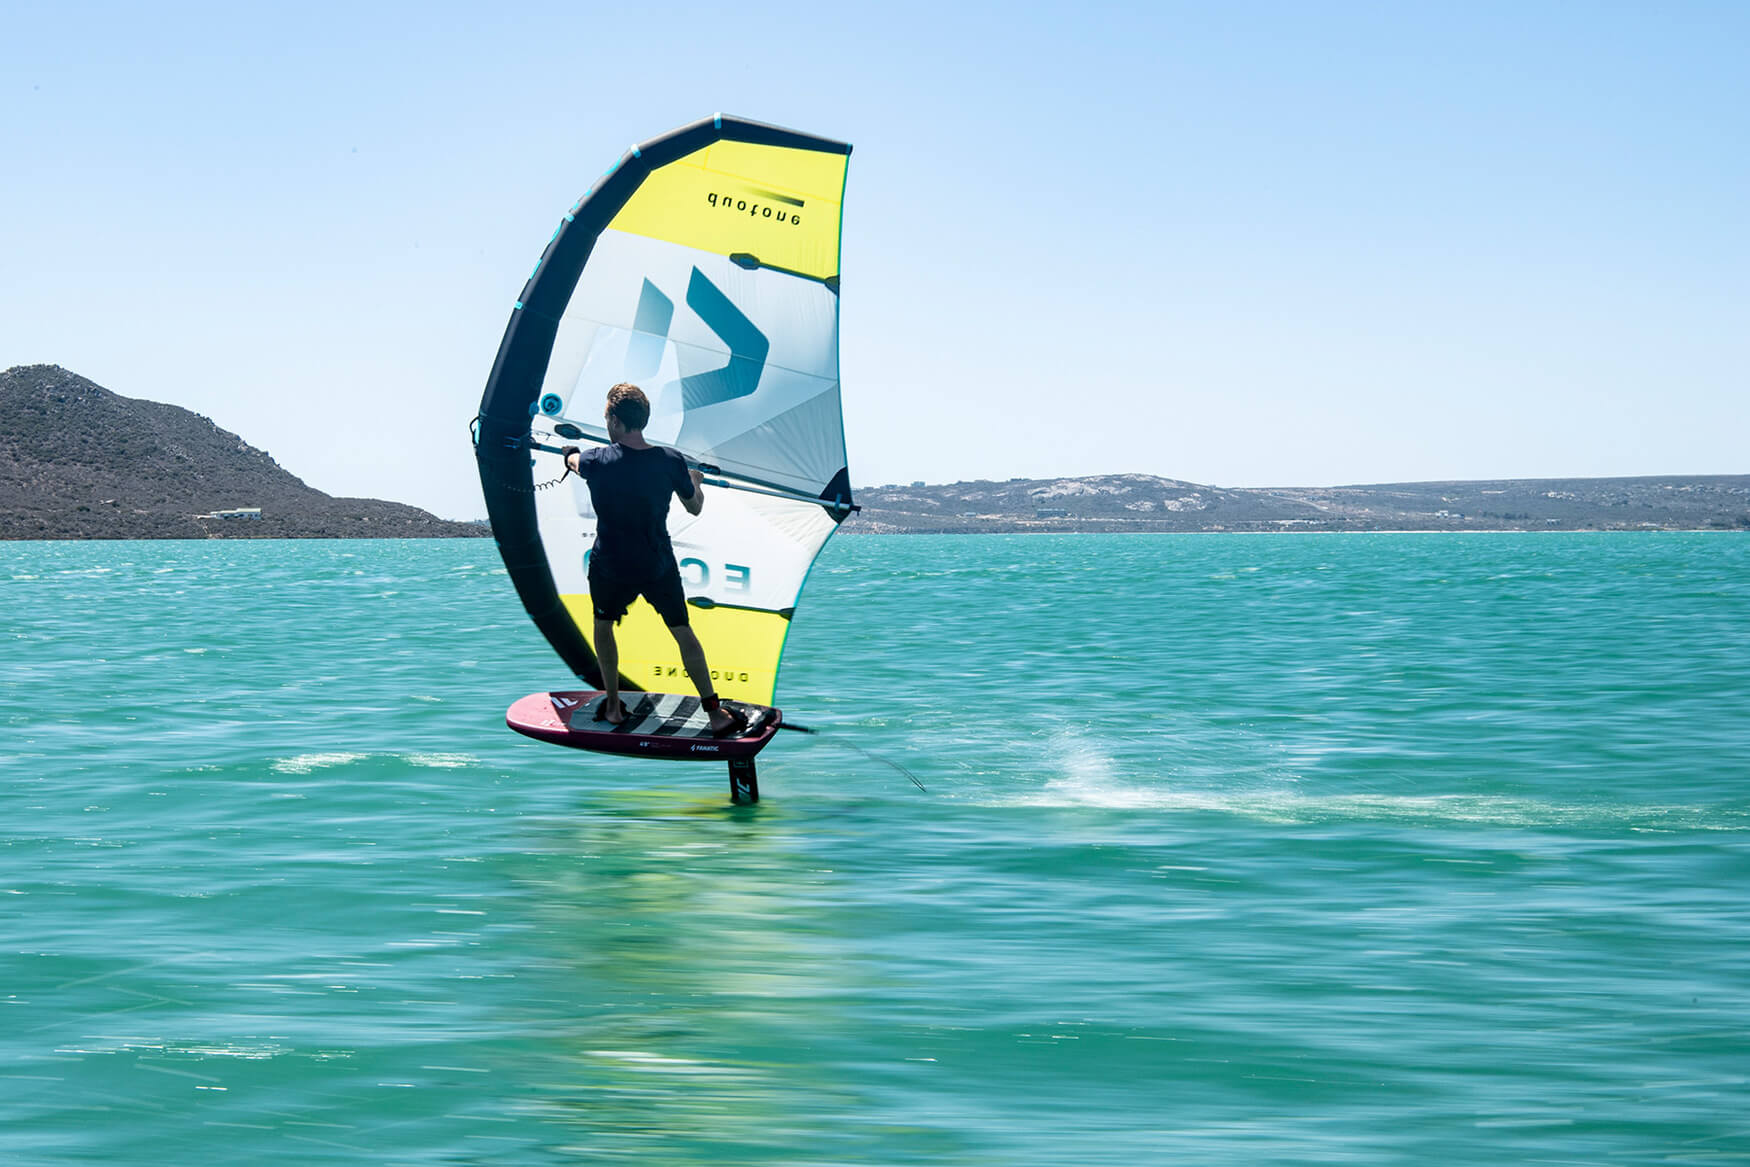 What to Choose - The right board & foil for Wing Foiling